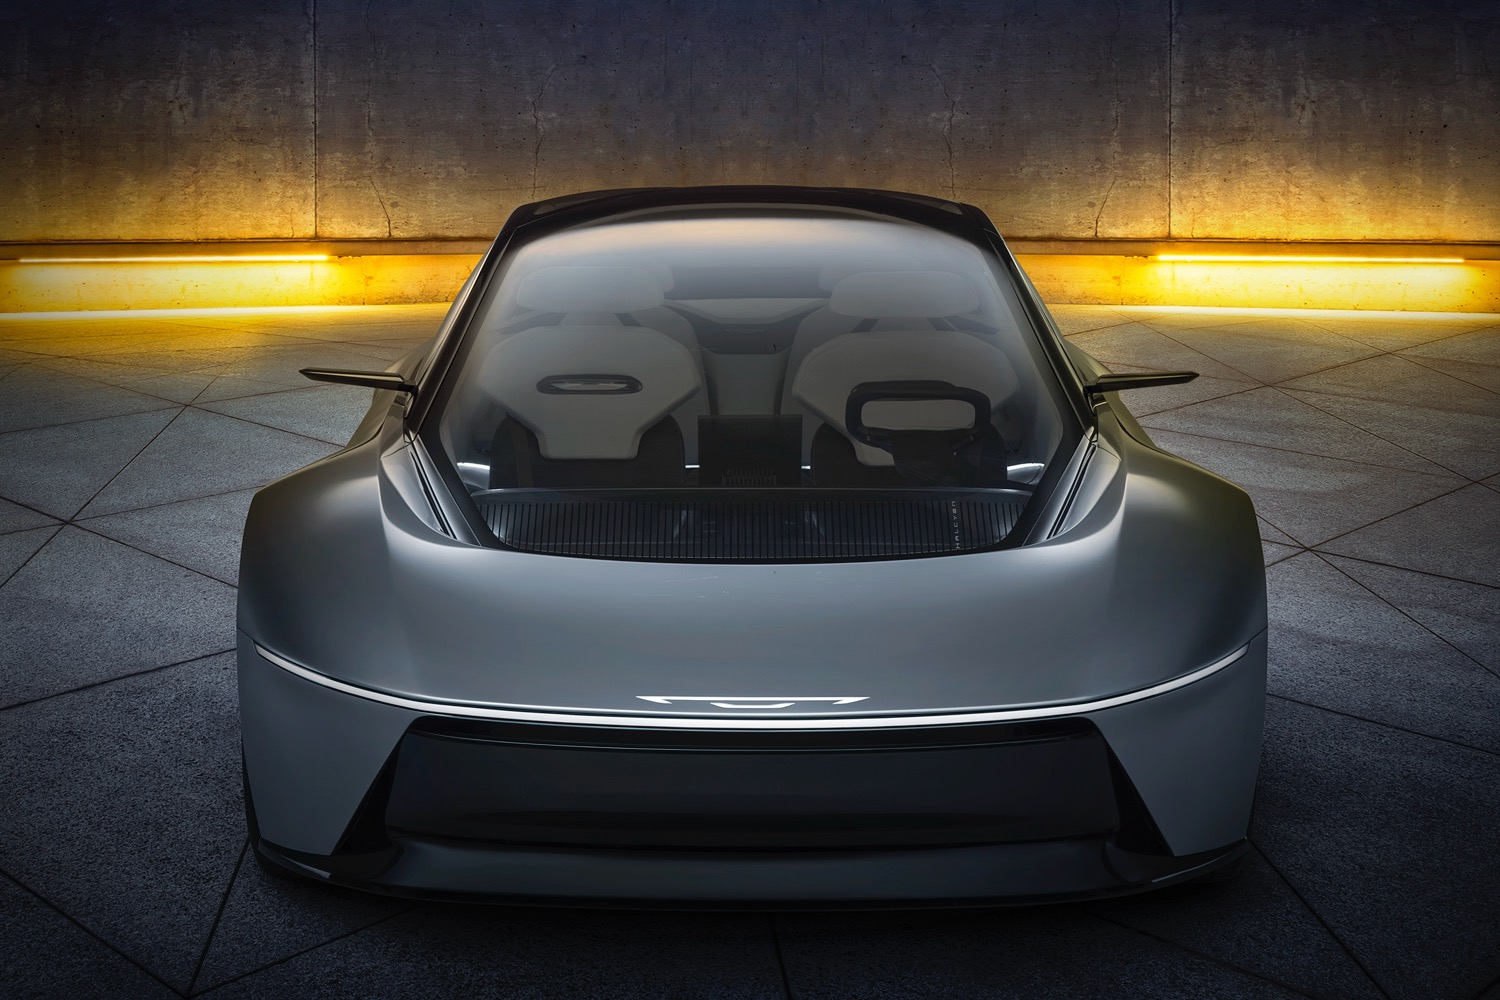 Front view of the Chrysler Halcyon concept.